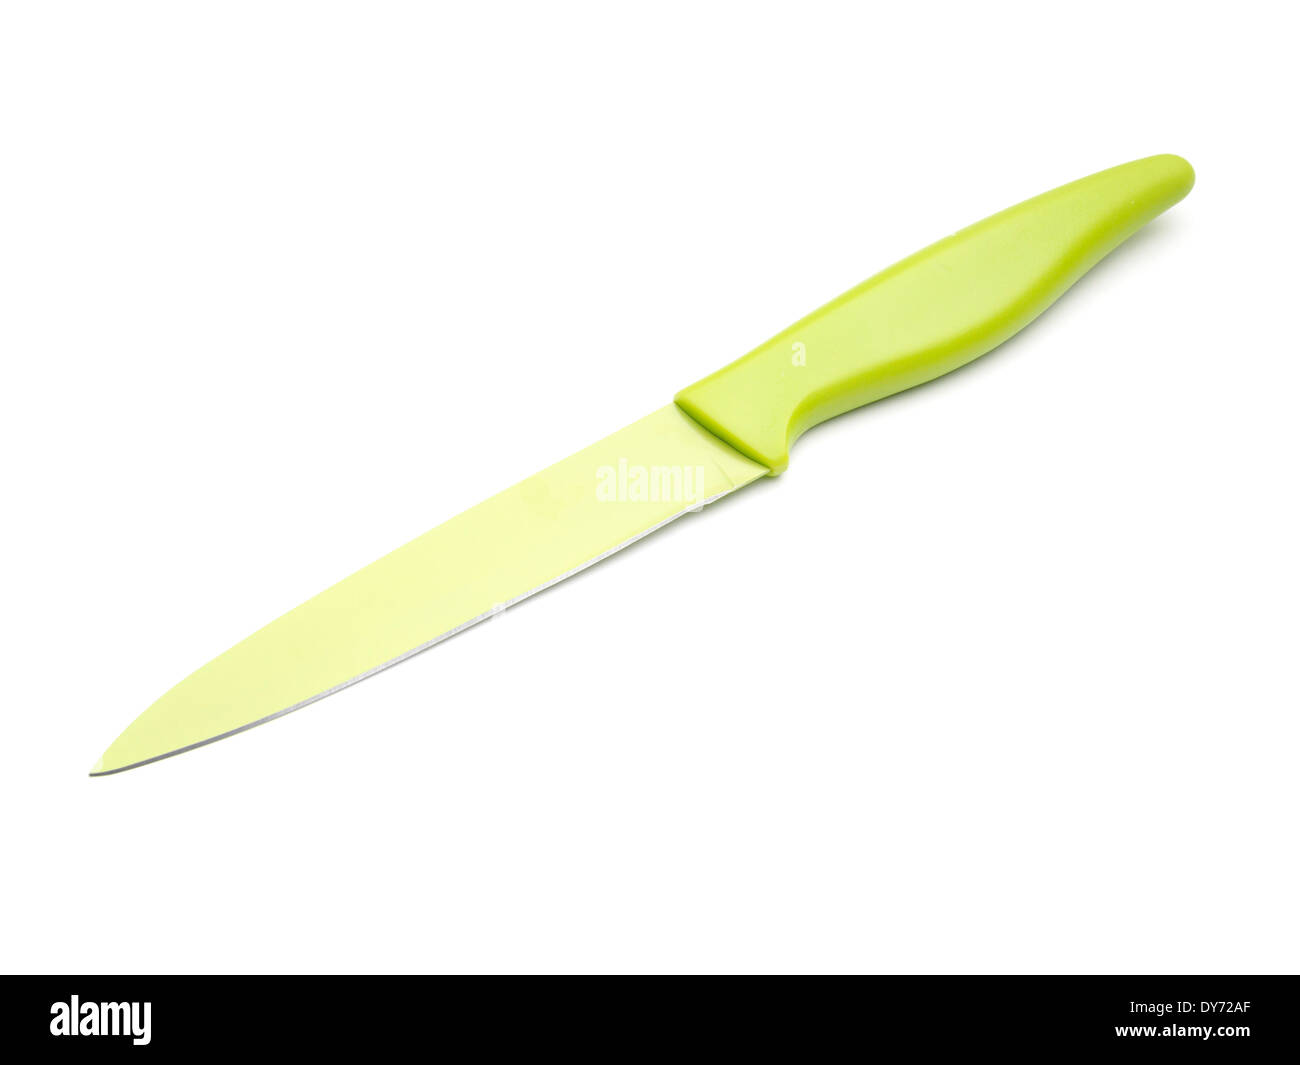 Pampered Chef 3 Stainless Serrated, cleaver, Curved Edge Knives Green